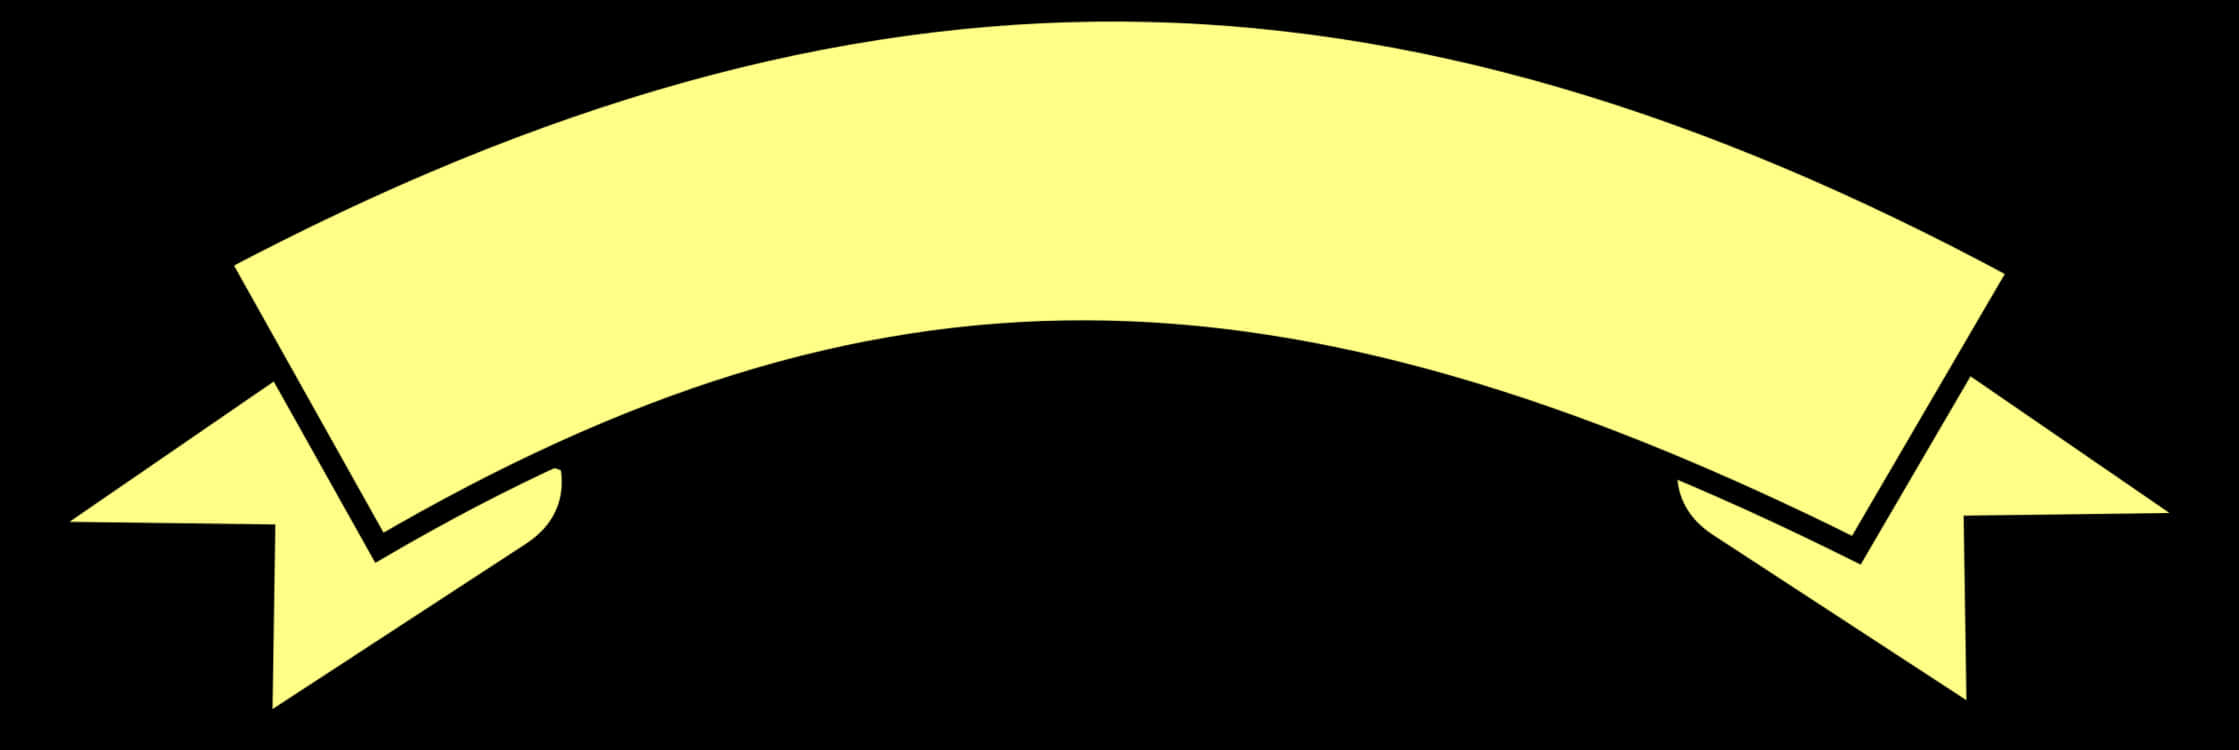 A Yellow And Black Curved Object